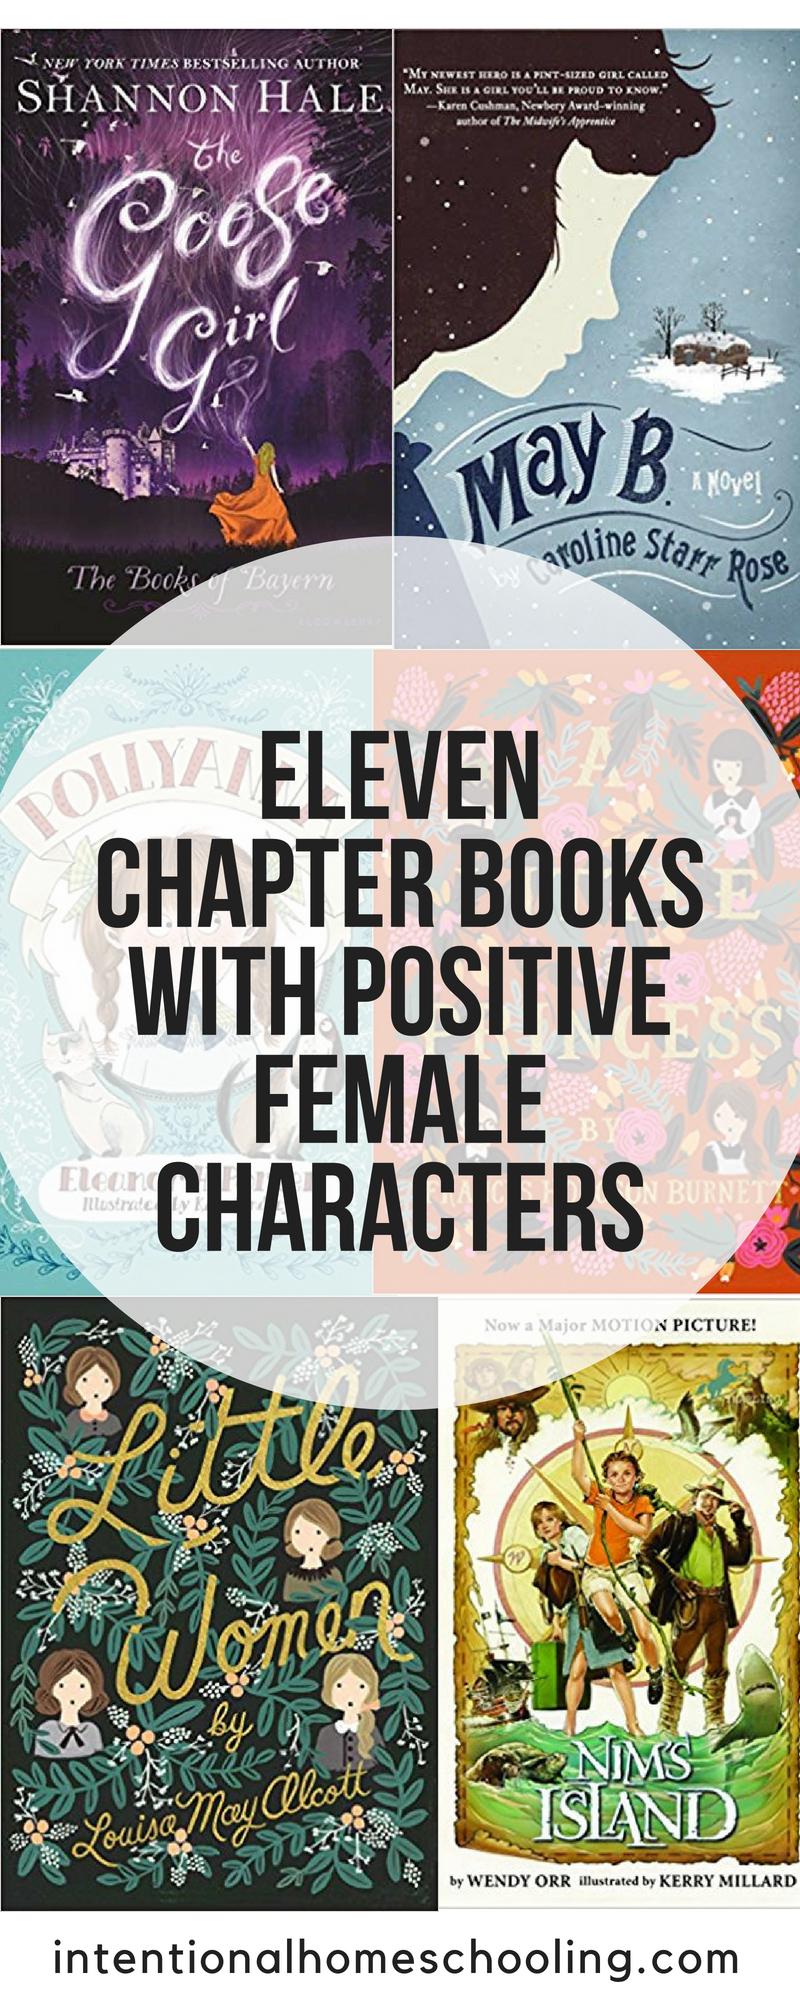 A great list of chapter books for young pre-teen and young teen girls with inspiring, strong and positive characters